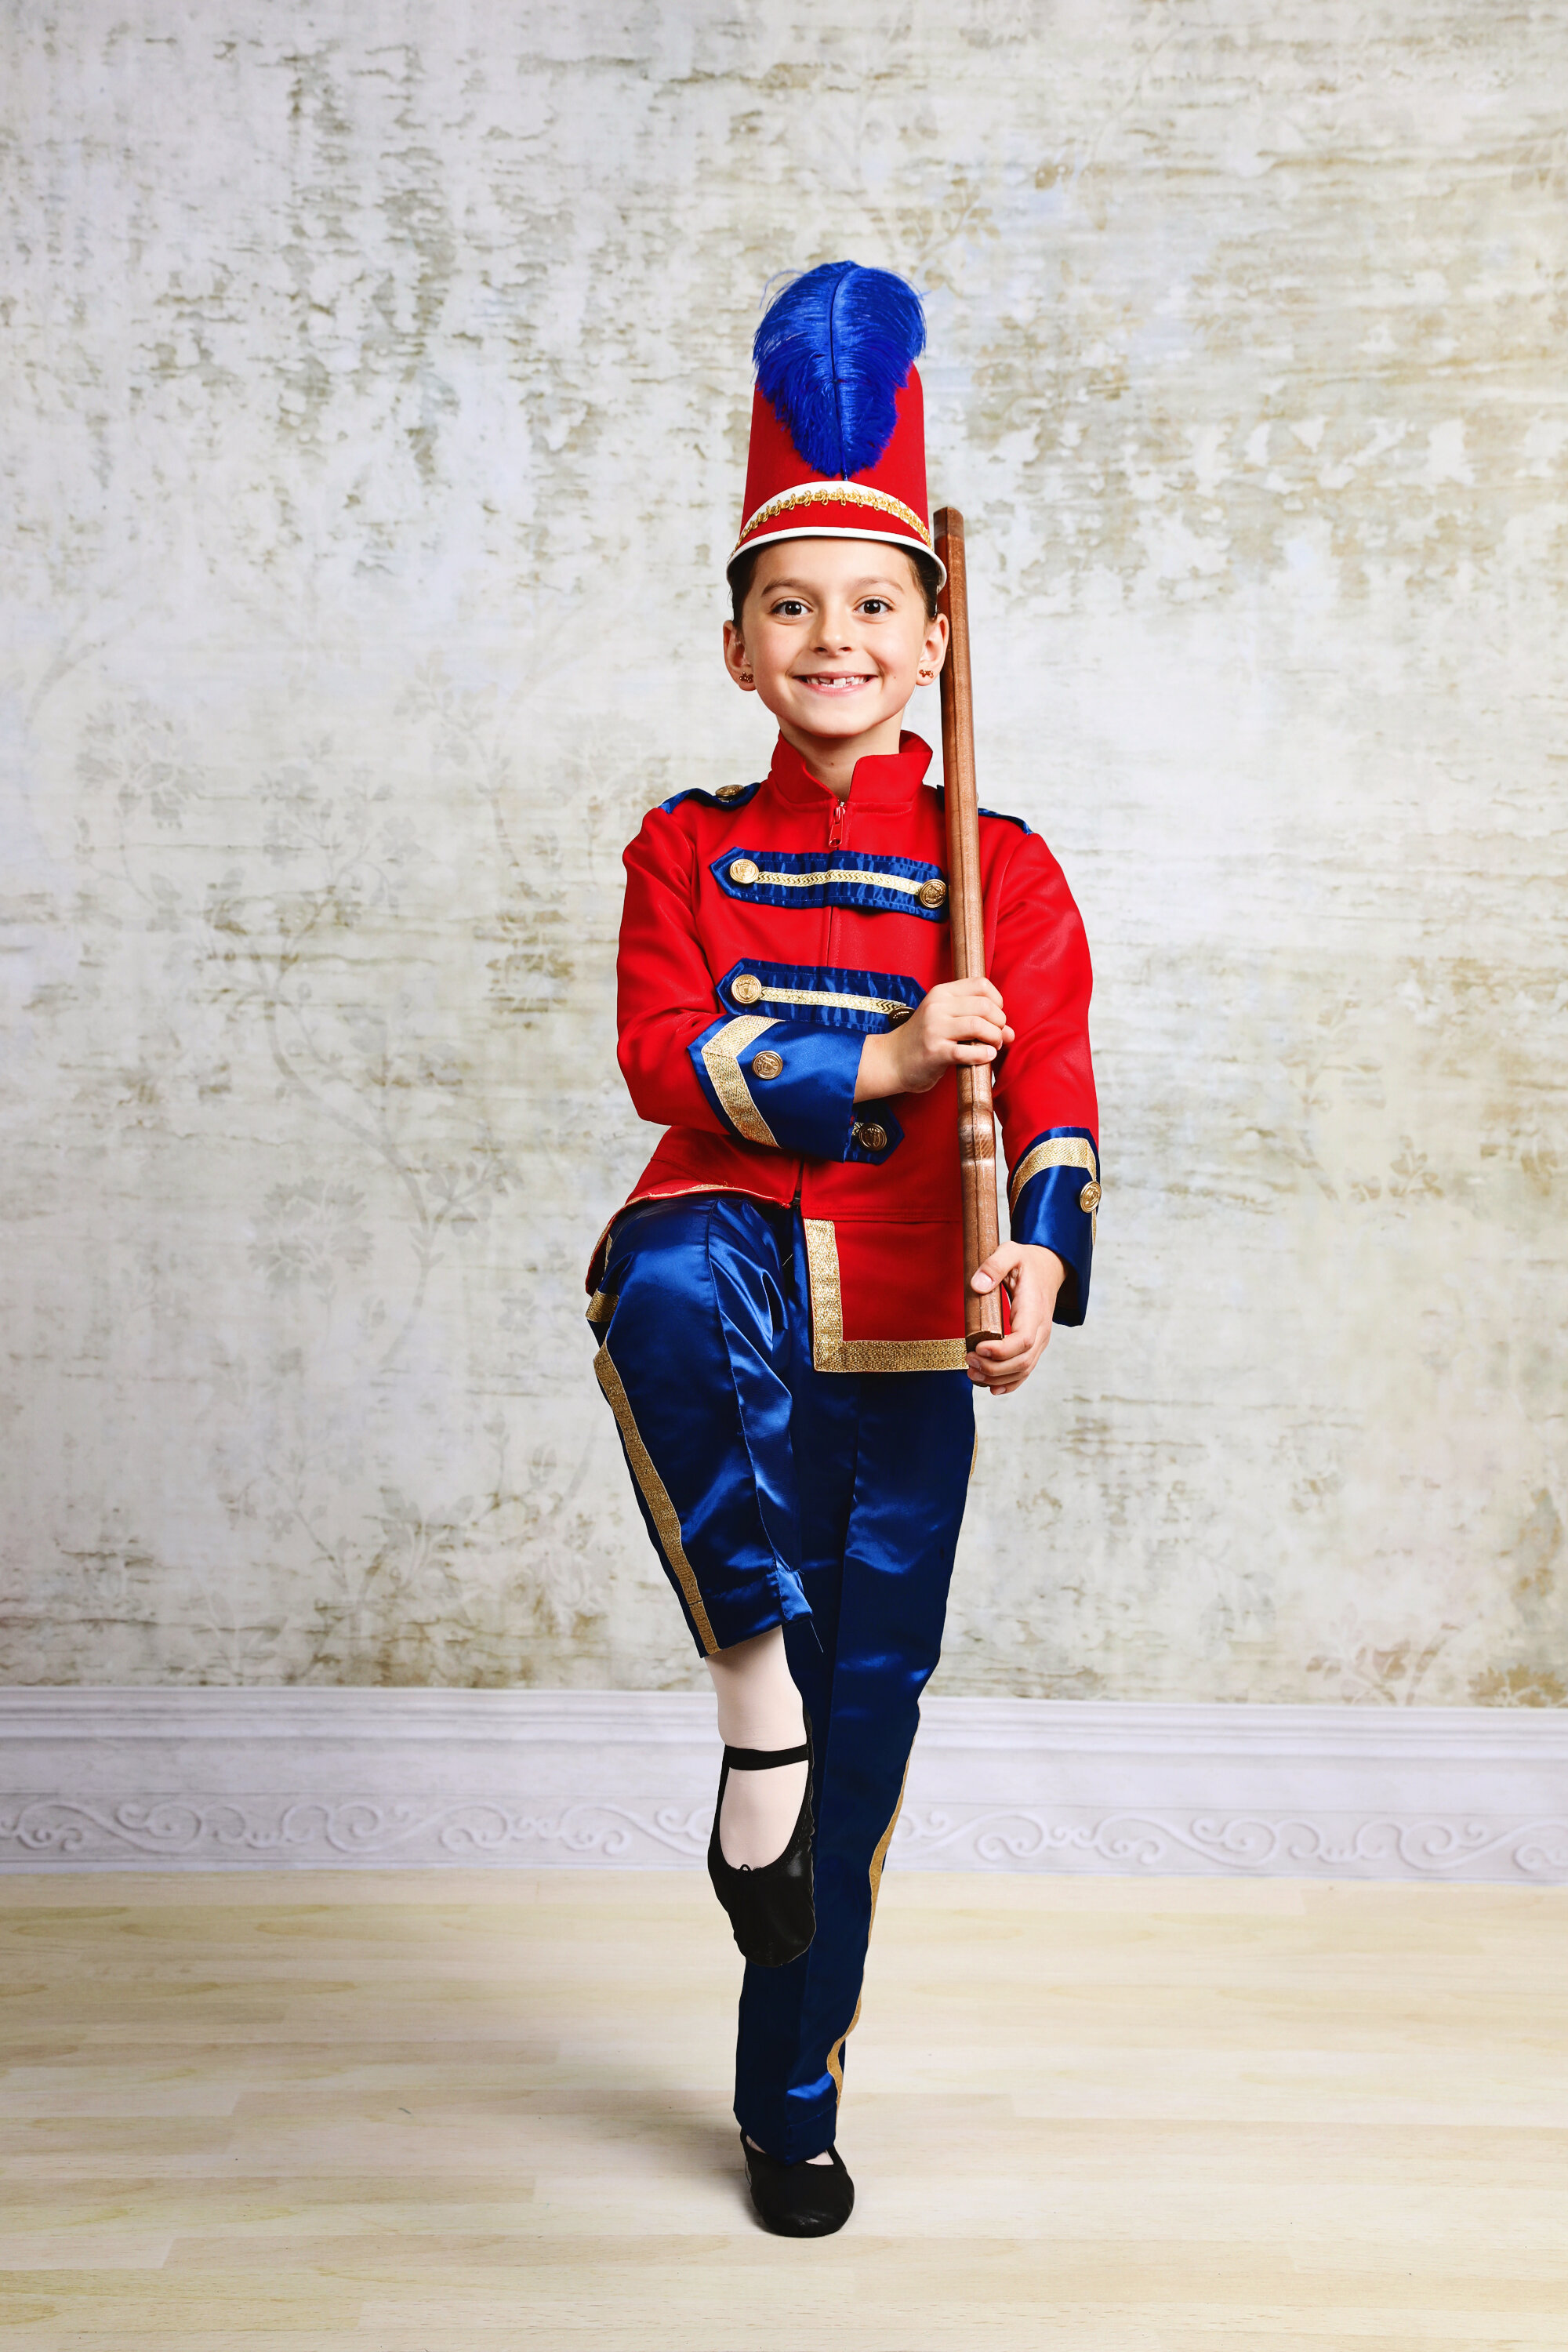 Indianapolis Nutcracker-soldier-marching.jpg